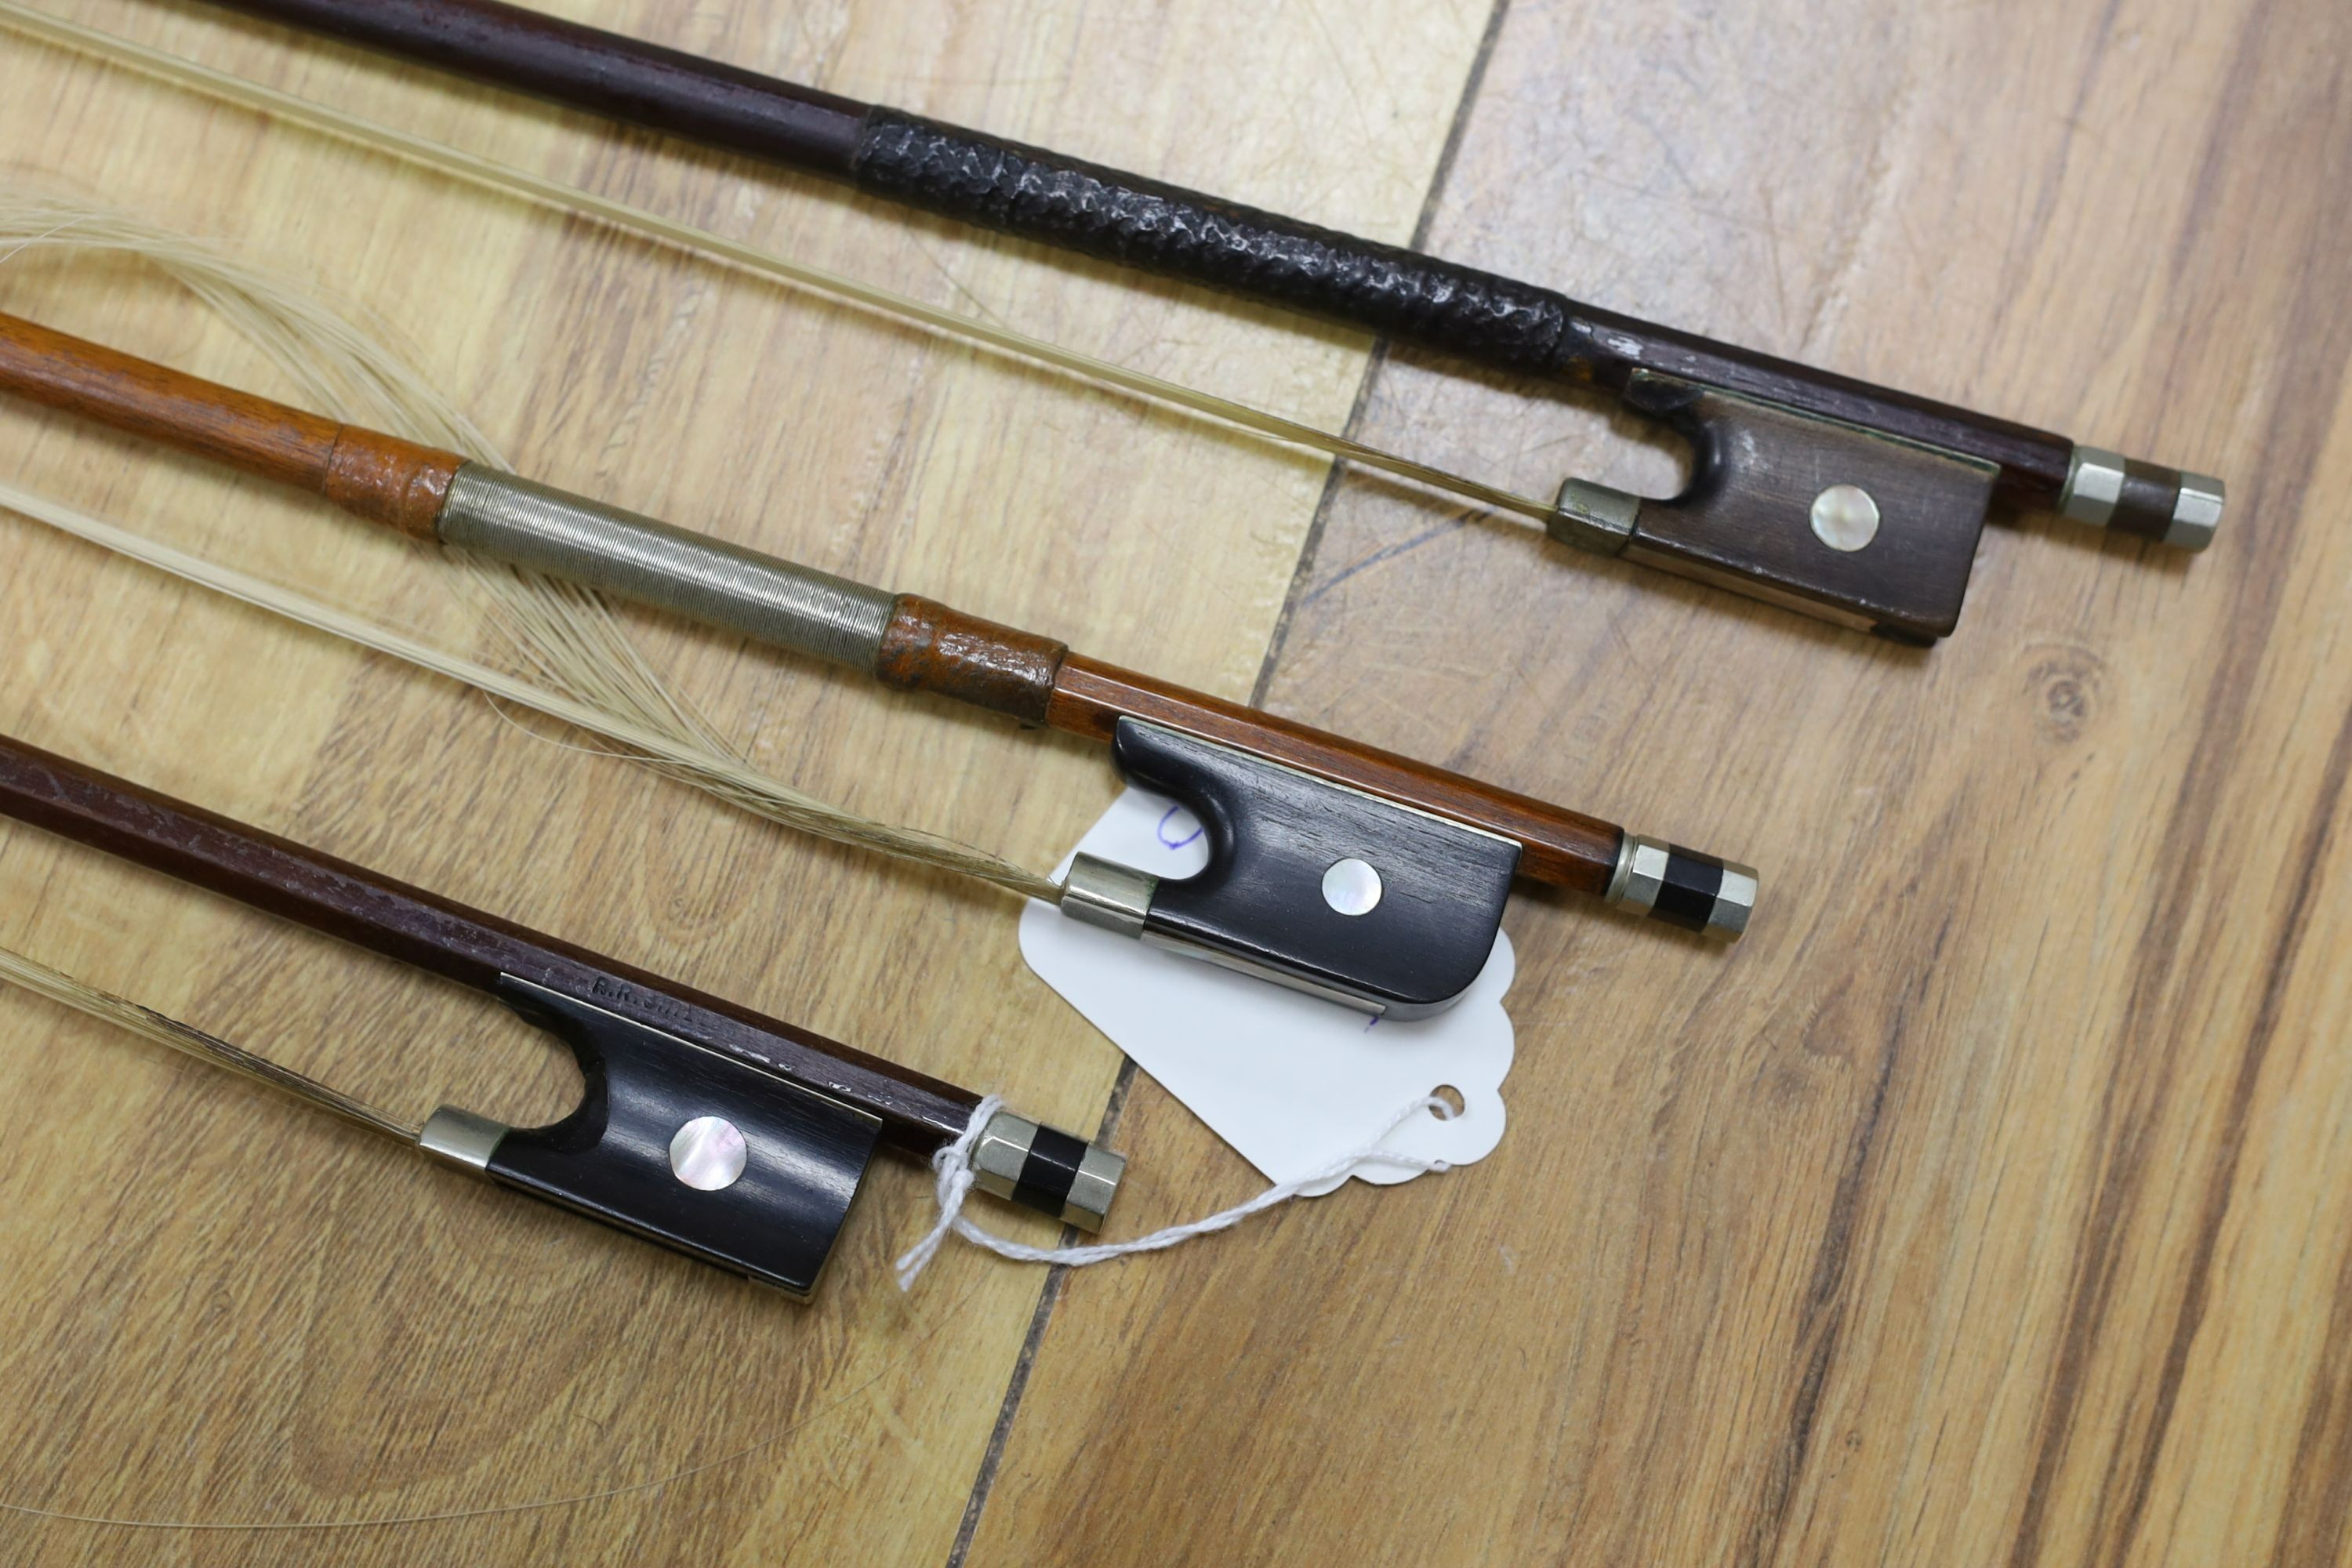 Three nickel mounted violin bows, one stamped R. R. Shields, two with ivory veneered tip - longest 75cm